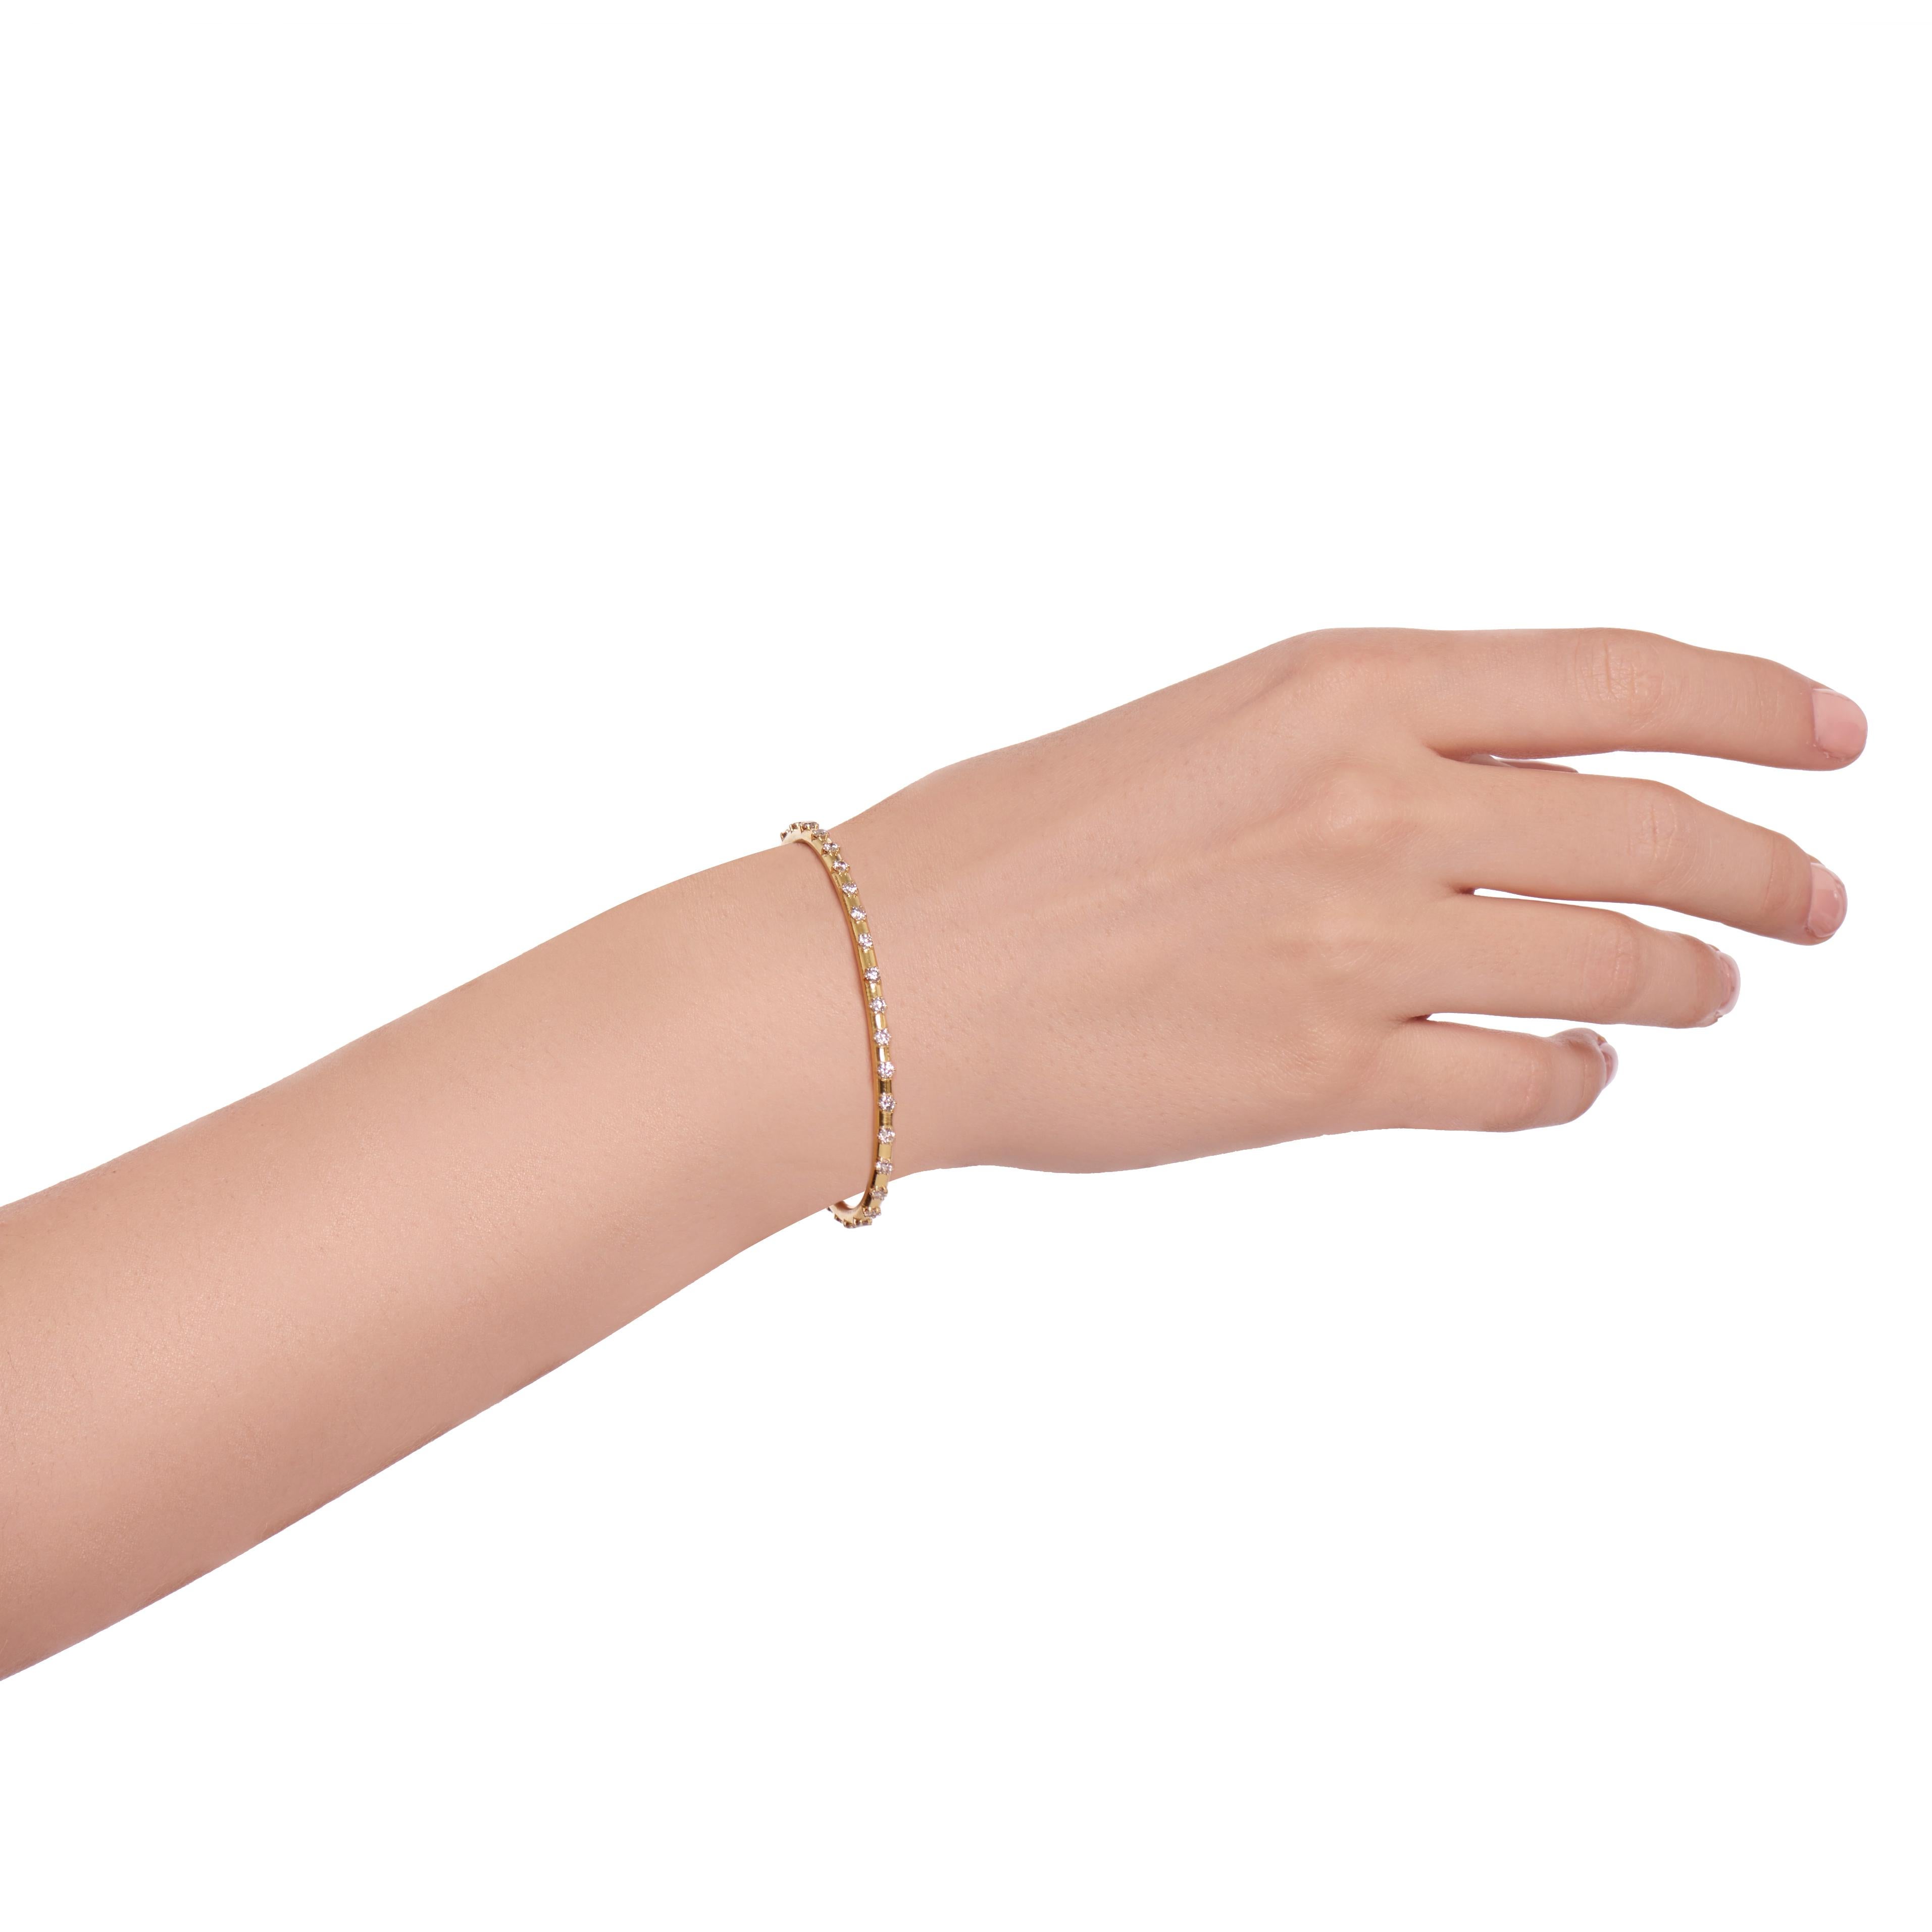 A solid 18 Karat Yellow Gold with 30 White Diamonds, total Carat weight 1.60.
This Cuff is called the 'Intention Cuff' and is designed to remind you to keep your attention on your intentions. 
It has a 2 cm opening and is 6